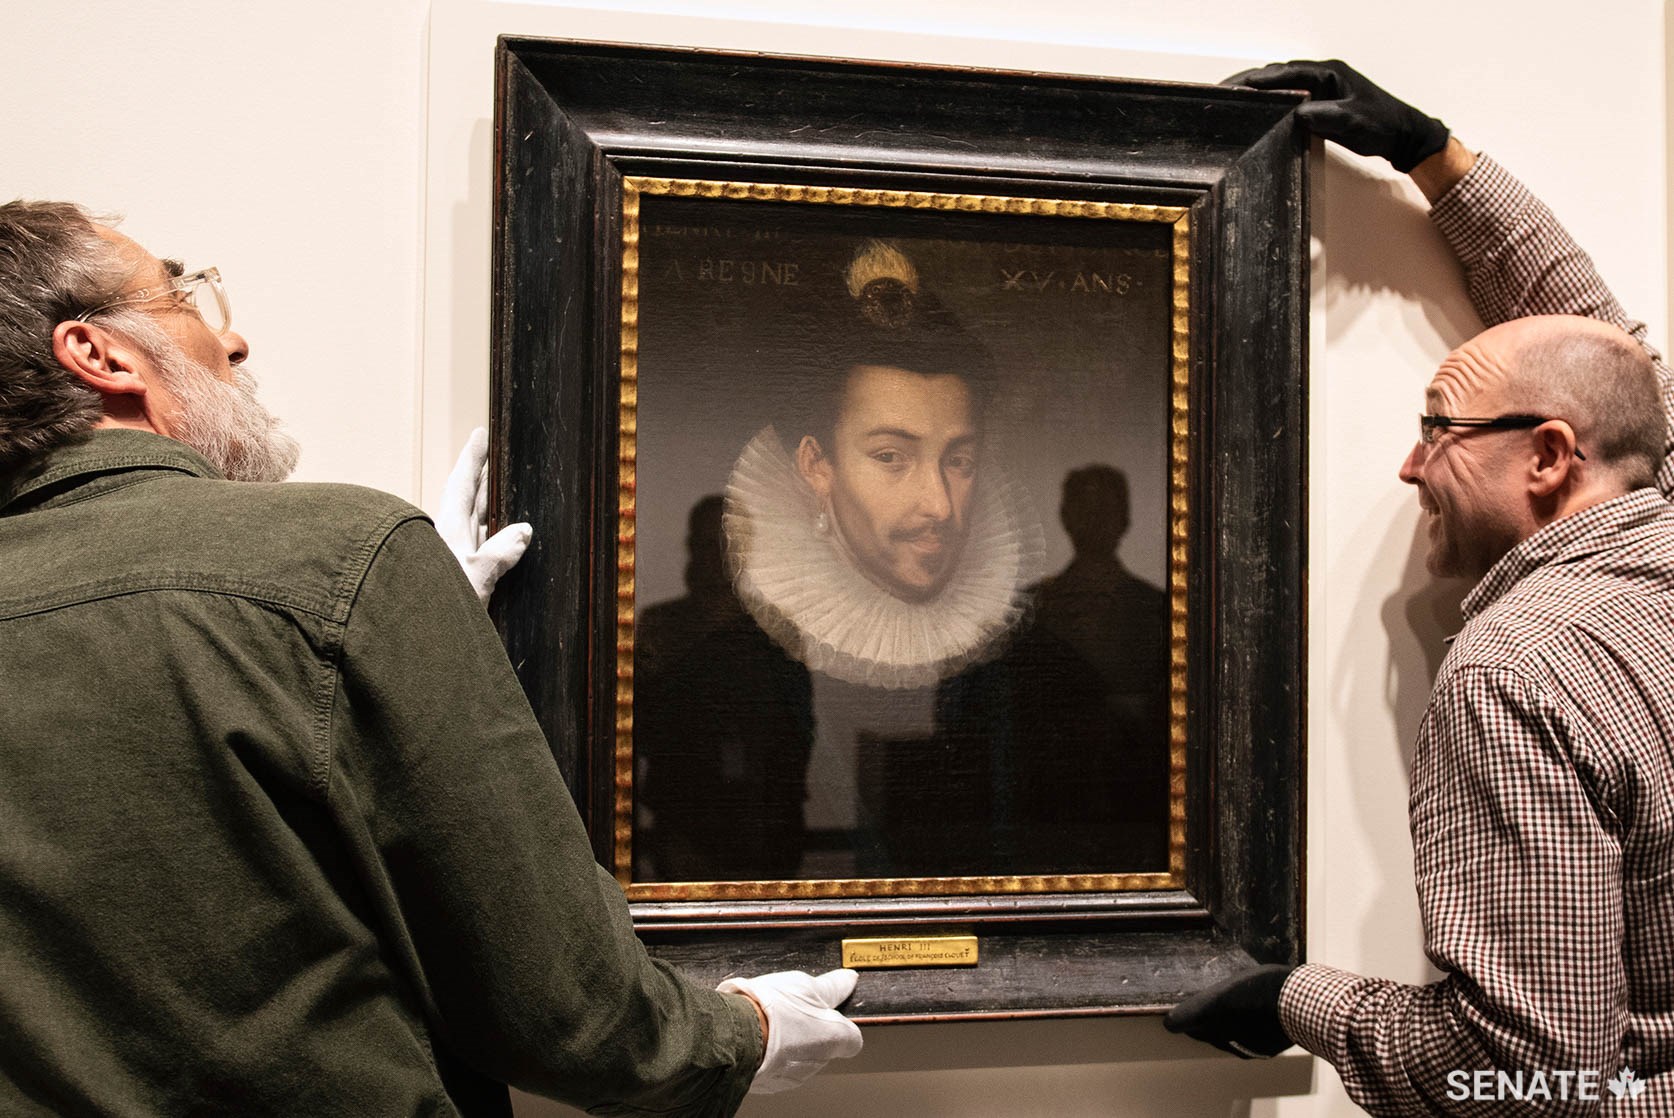 Freshly uncrated, Henri III appears to watch with trepidation as exhibition preparators settle his portrait onto a custom-built mounting in the foyer of the Senate of Canada Building in October 2019.